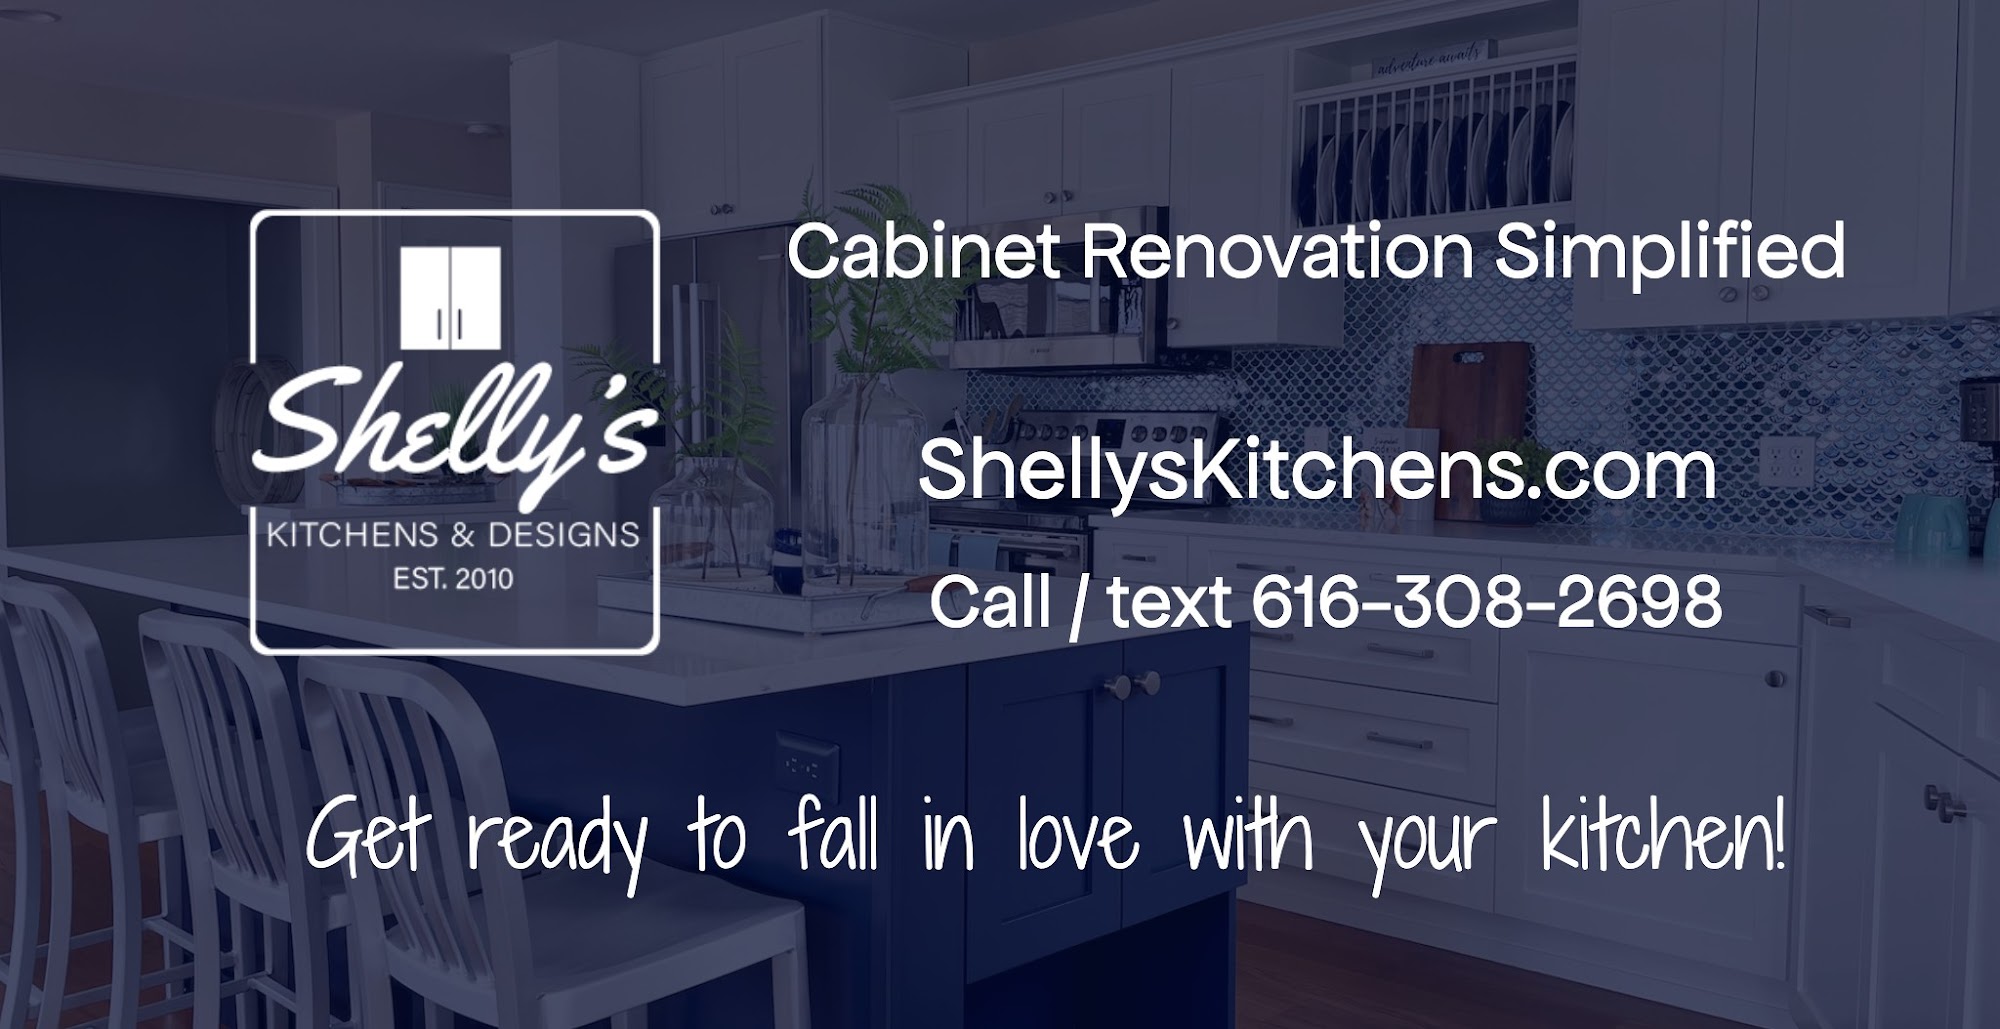 Shelly's Kitchens & Designs